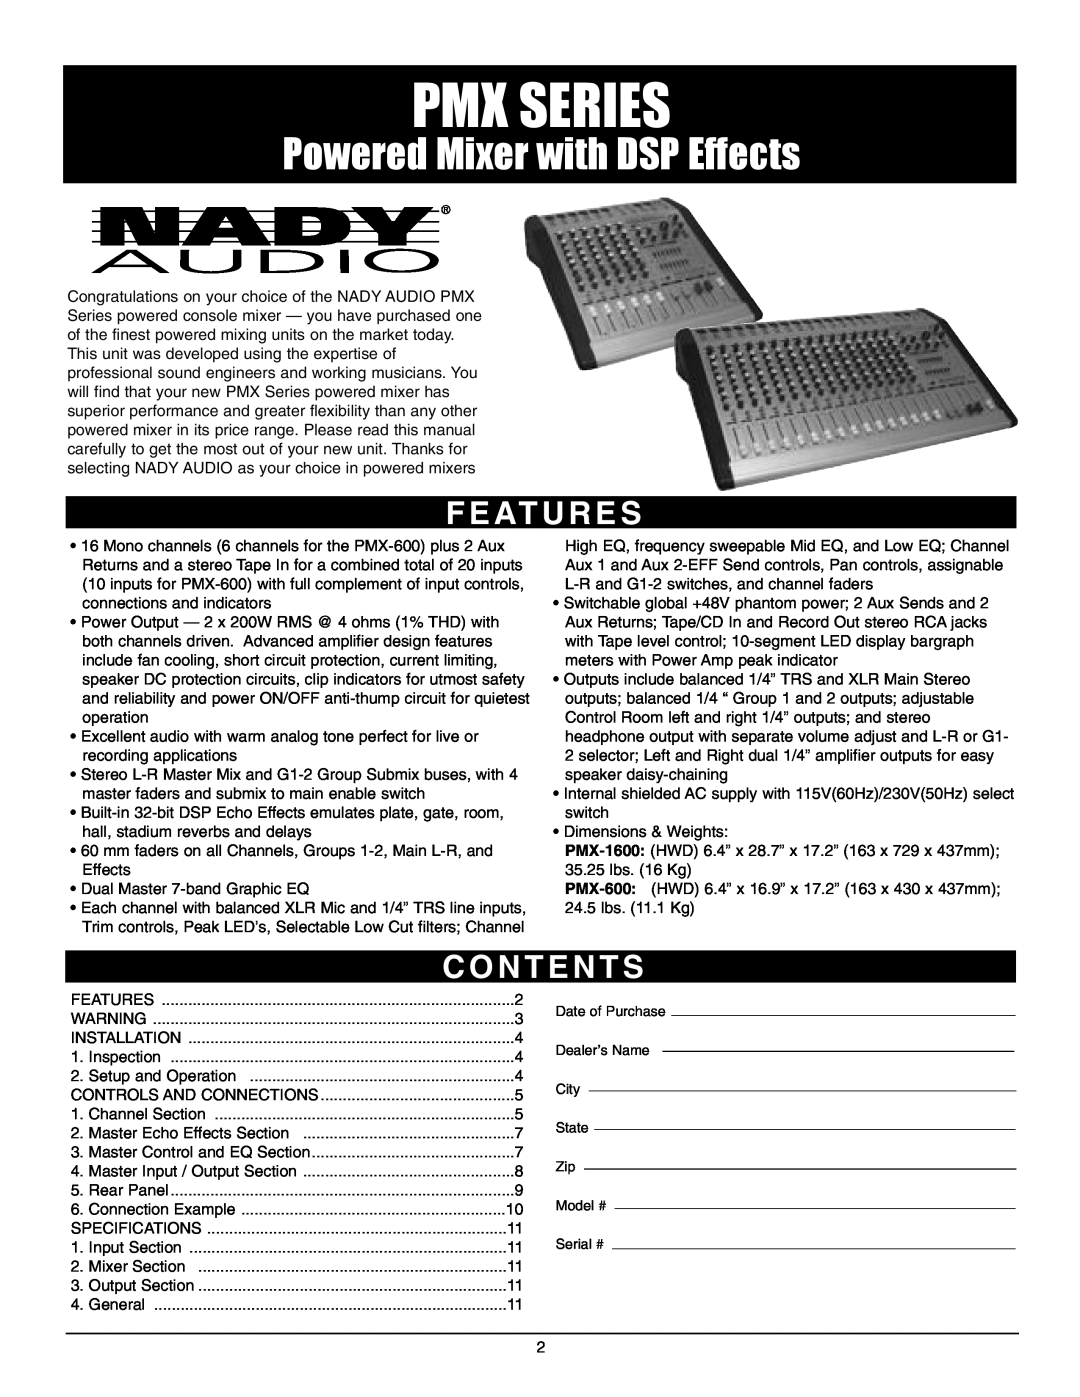 Nady Systems PMX-600 6, PMX-1600 16 F E At U R E S, C O N T E N T S, Pmx Series, Powered Mixer with DSP Effects 